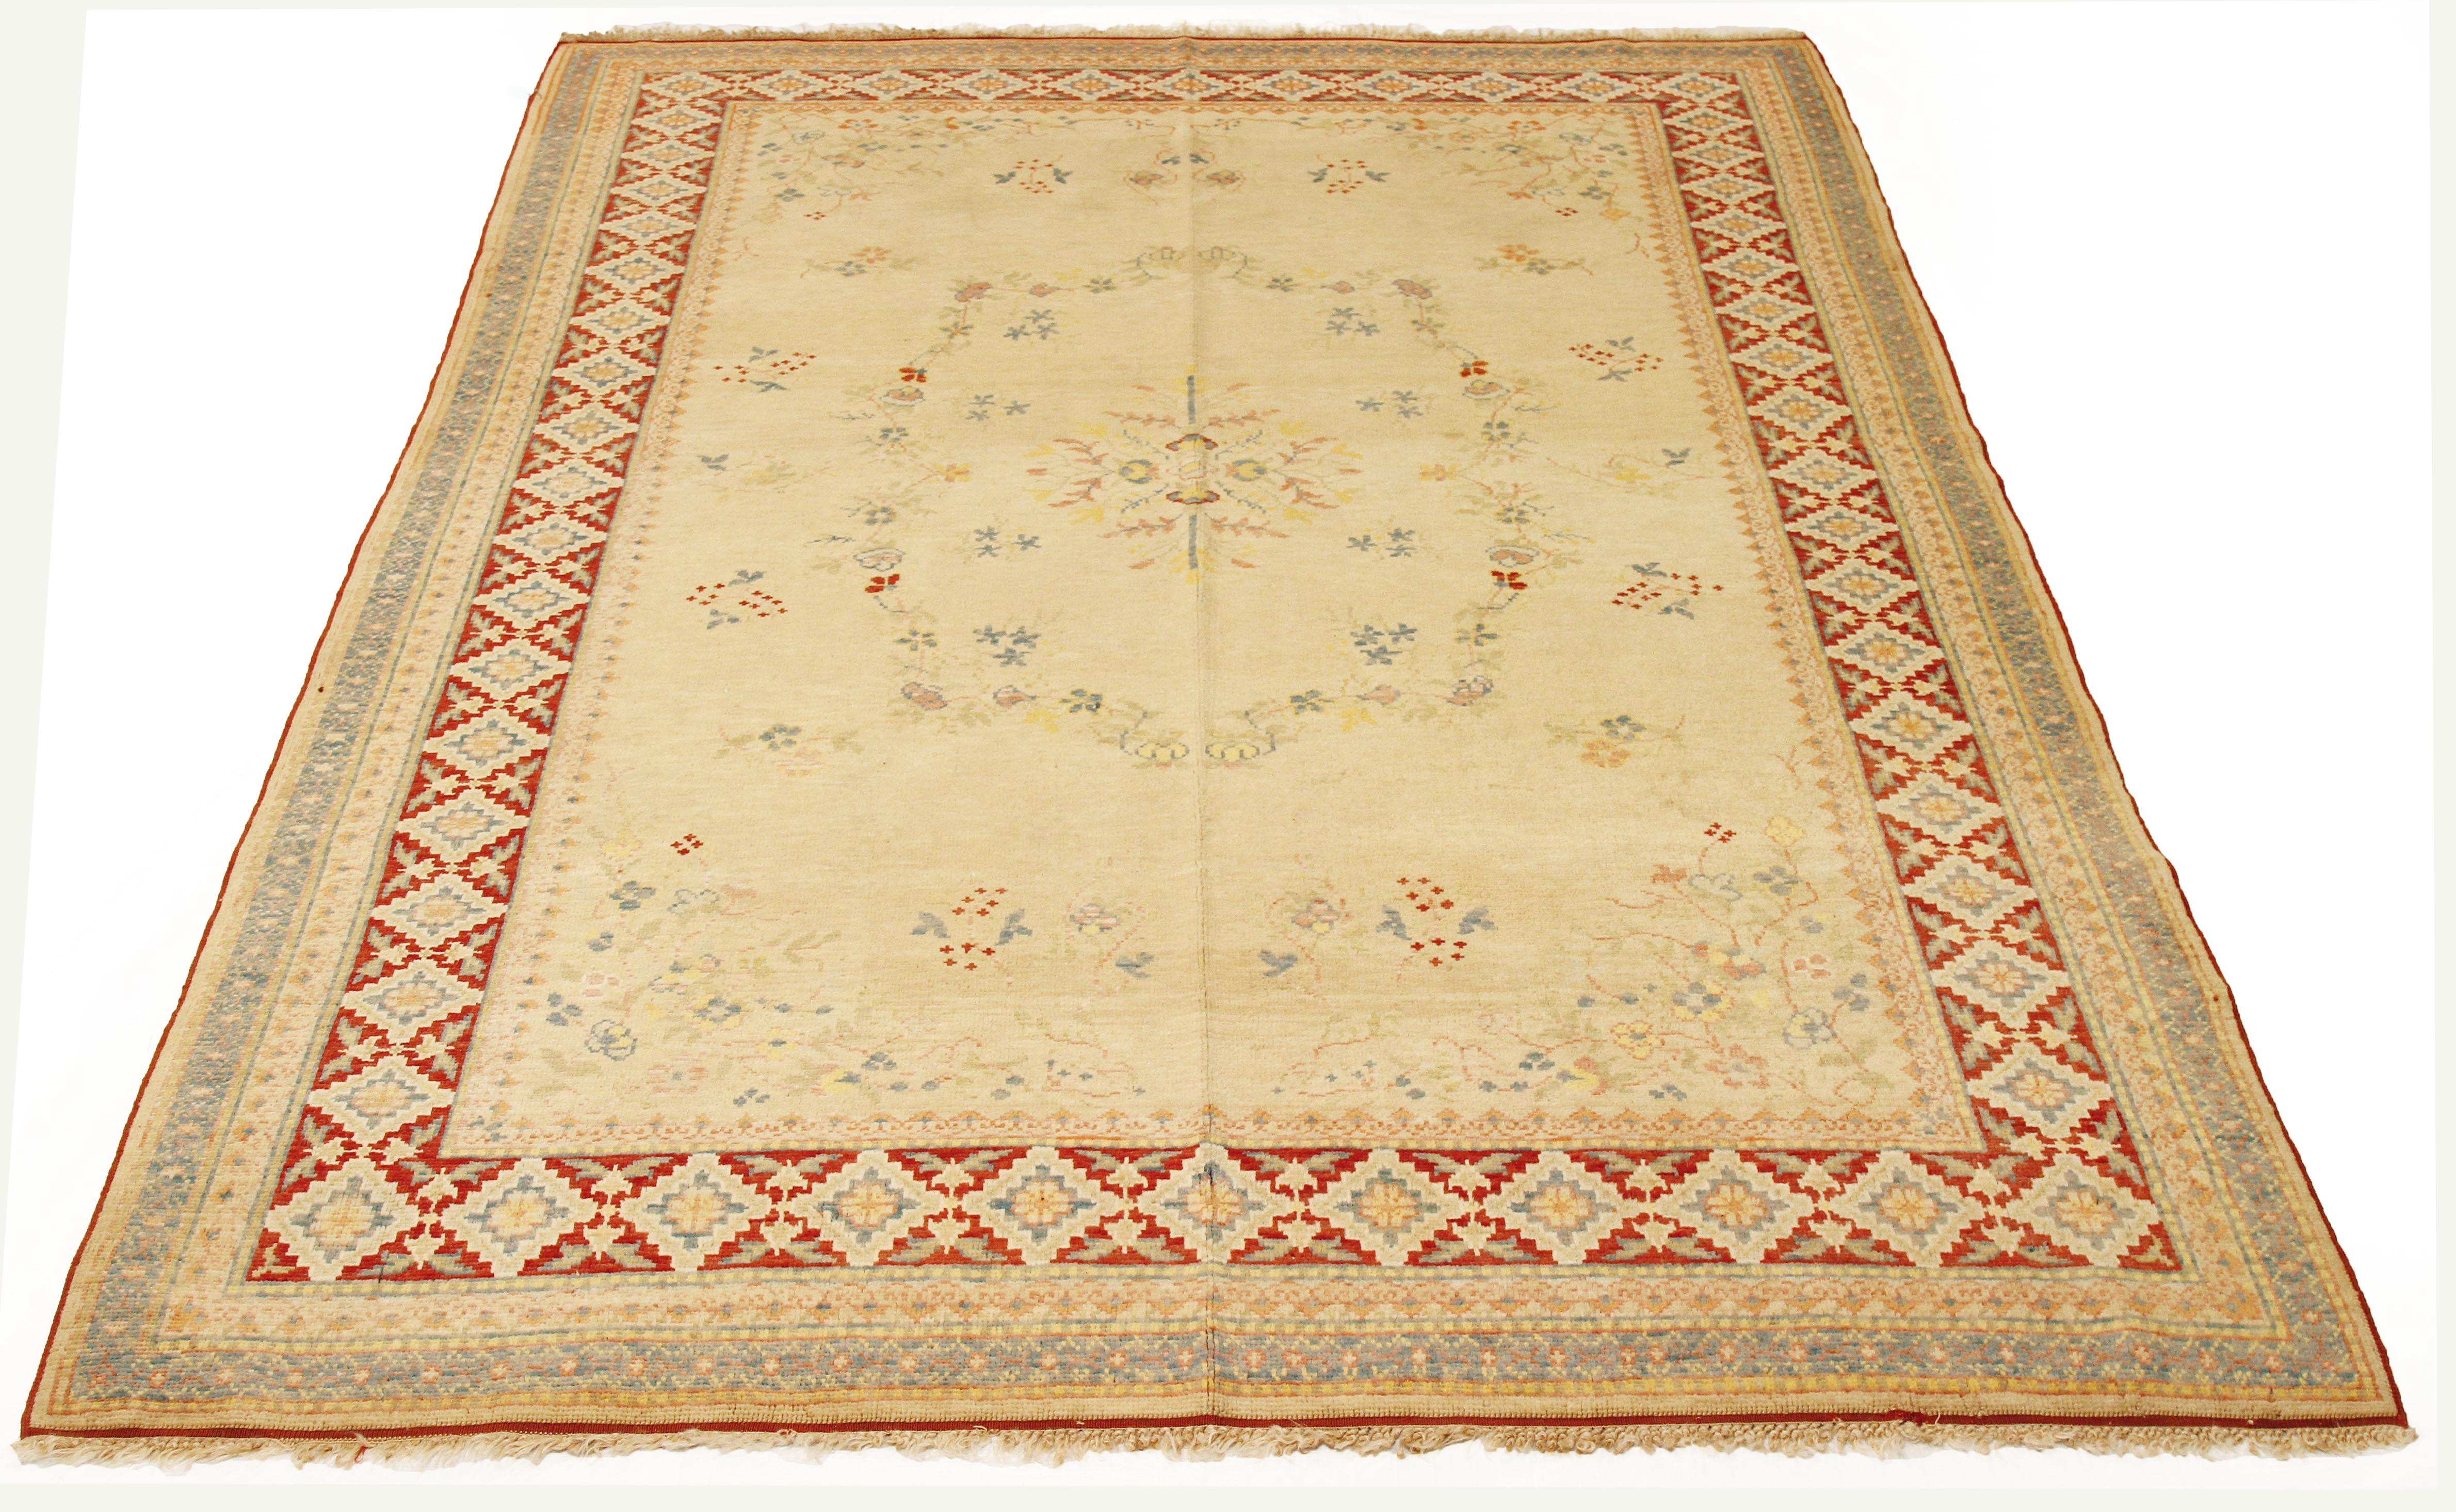 Contemporary Turkish rug handwoven from the finest sheep’s wool and colored with all-natural vegetable dyes that are safe for humans and pets. It’s a traditional Turkish design featuring pastel-colored floral details on an ivory field. It’s a lovely